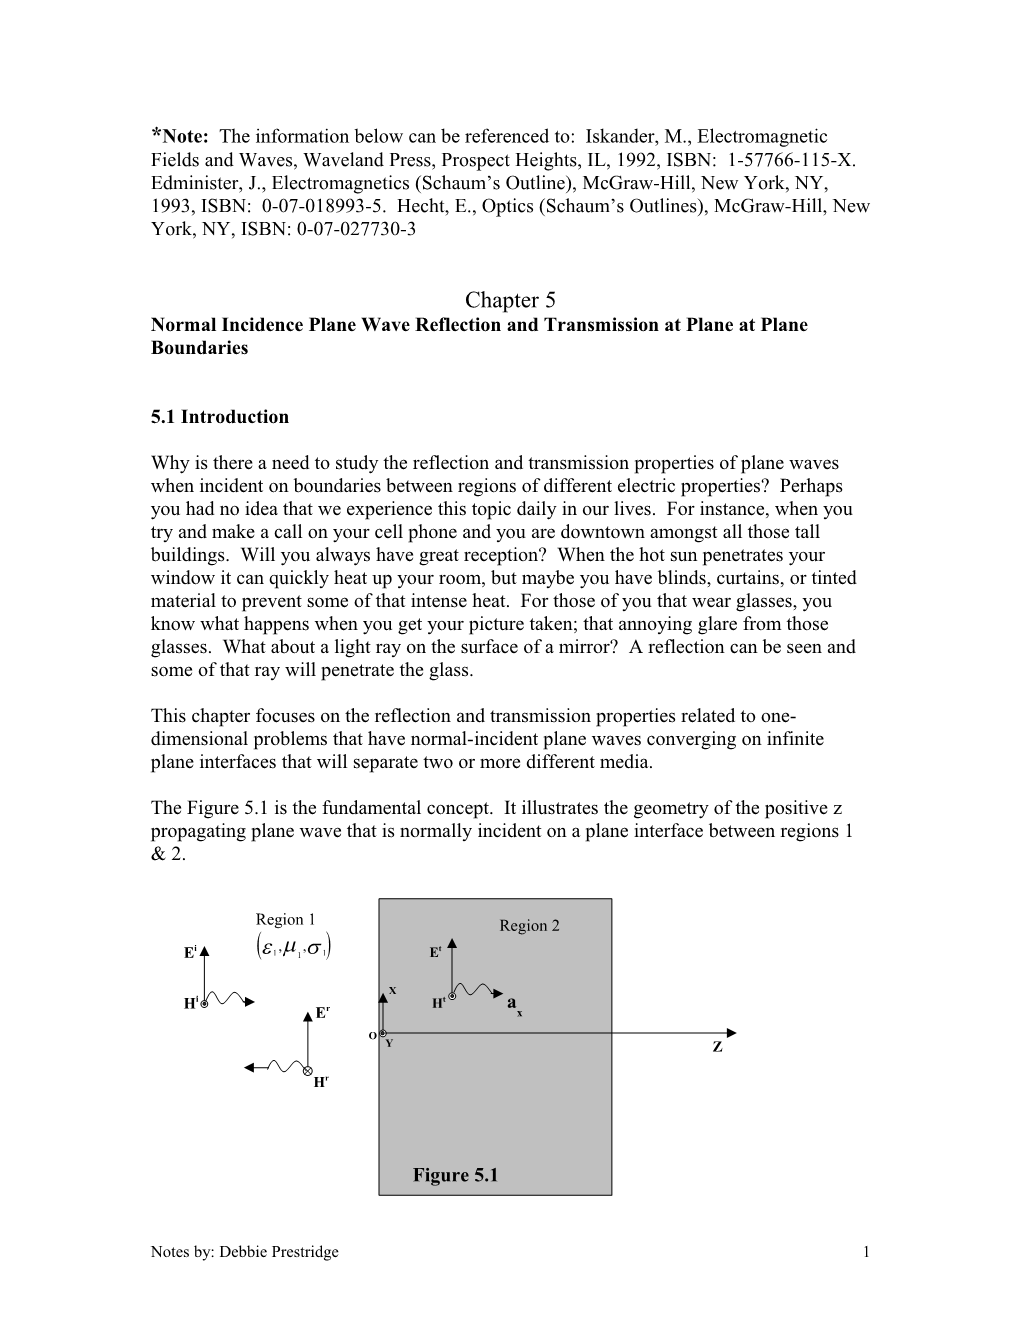 Normal Incidence Plane Wave Reflection and Transmission at Plane at Plane Boundaries